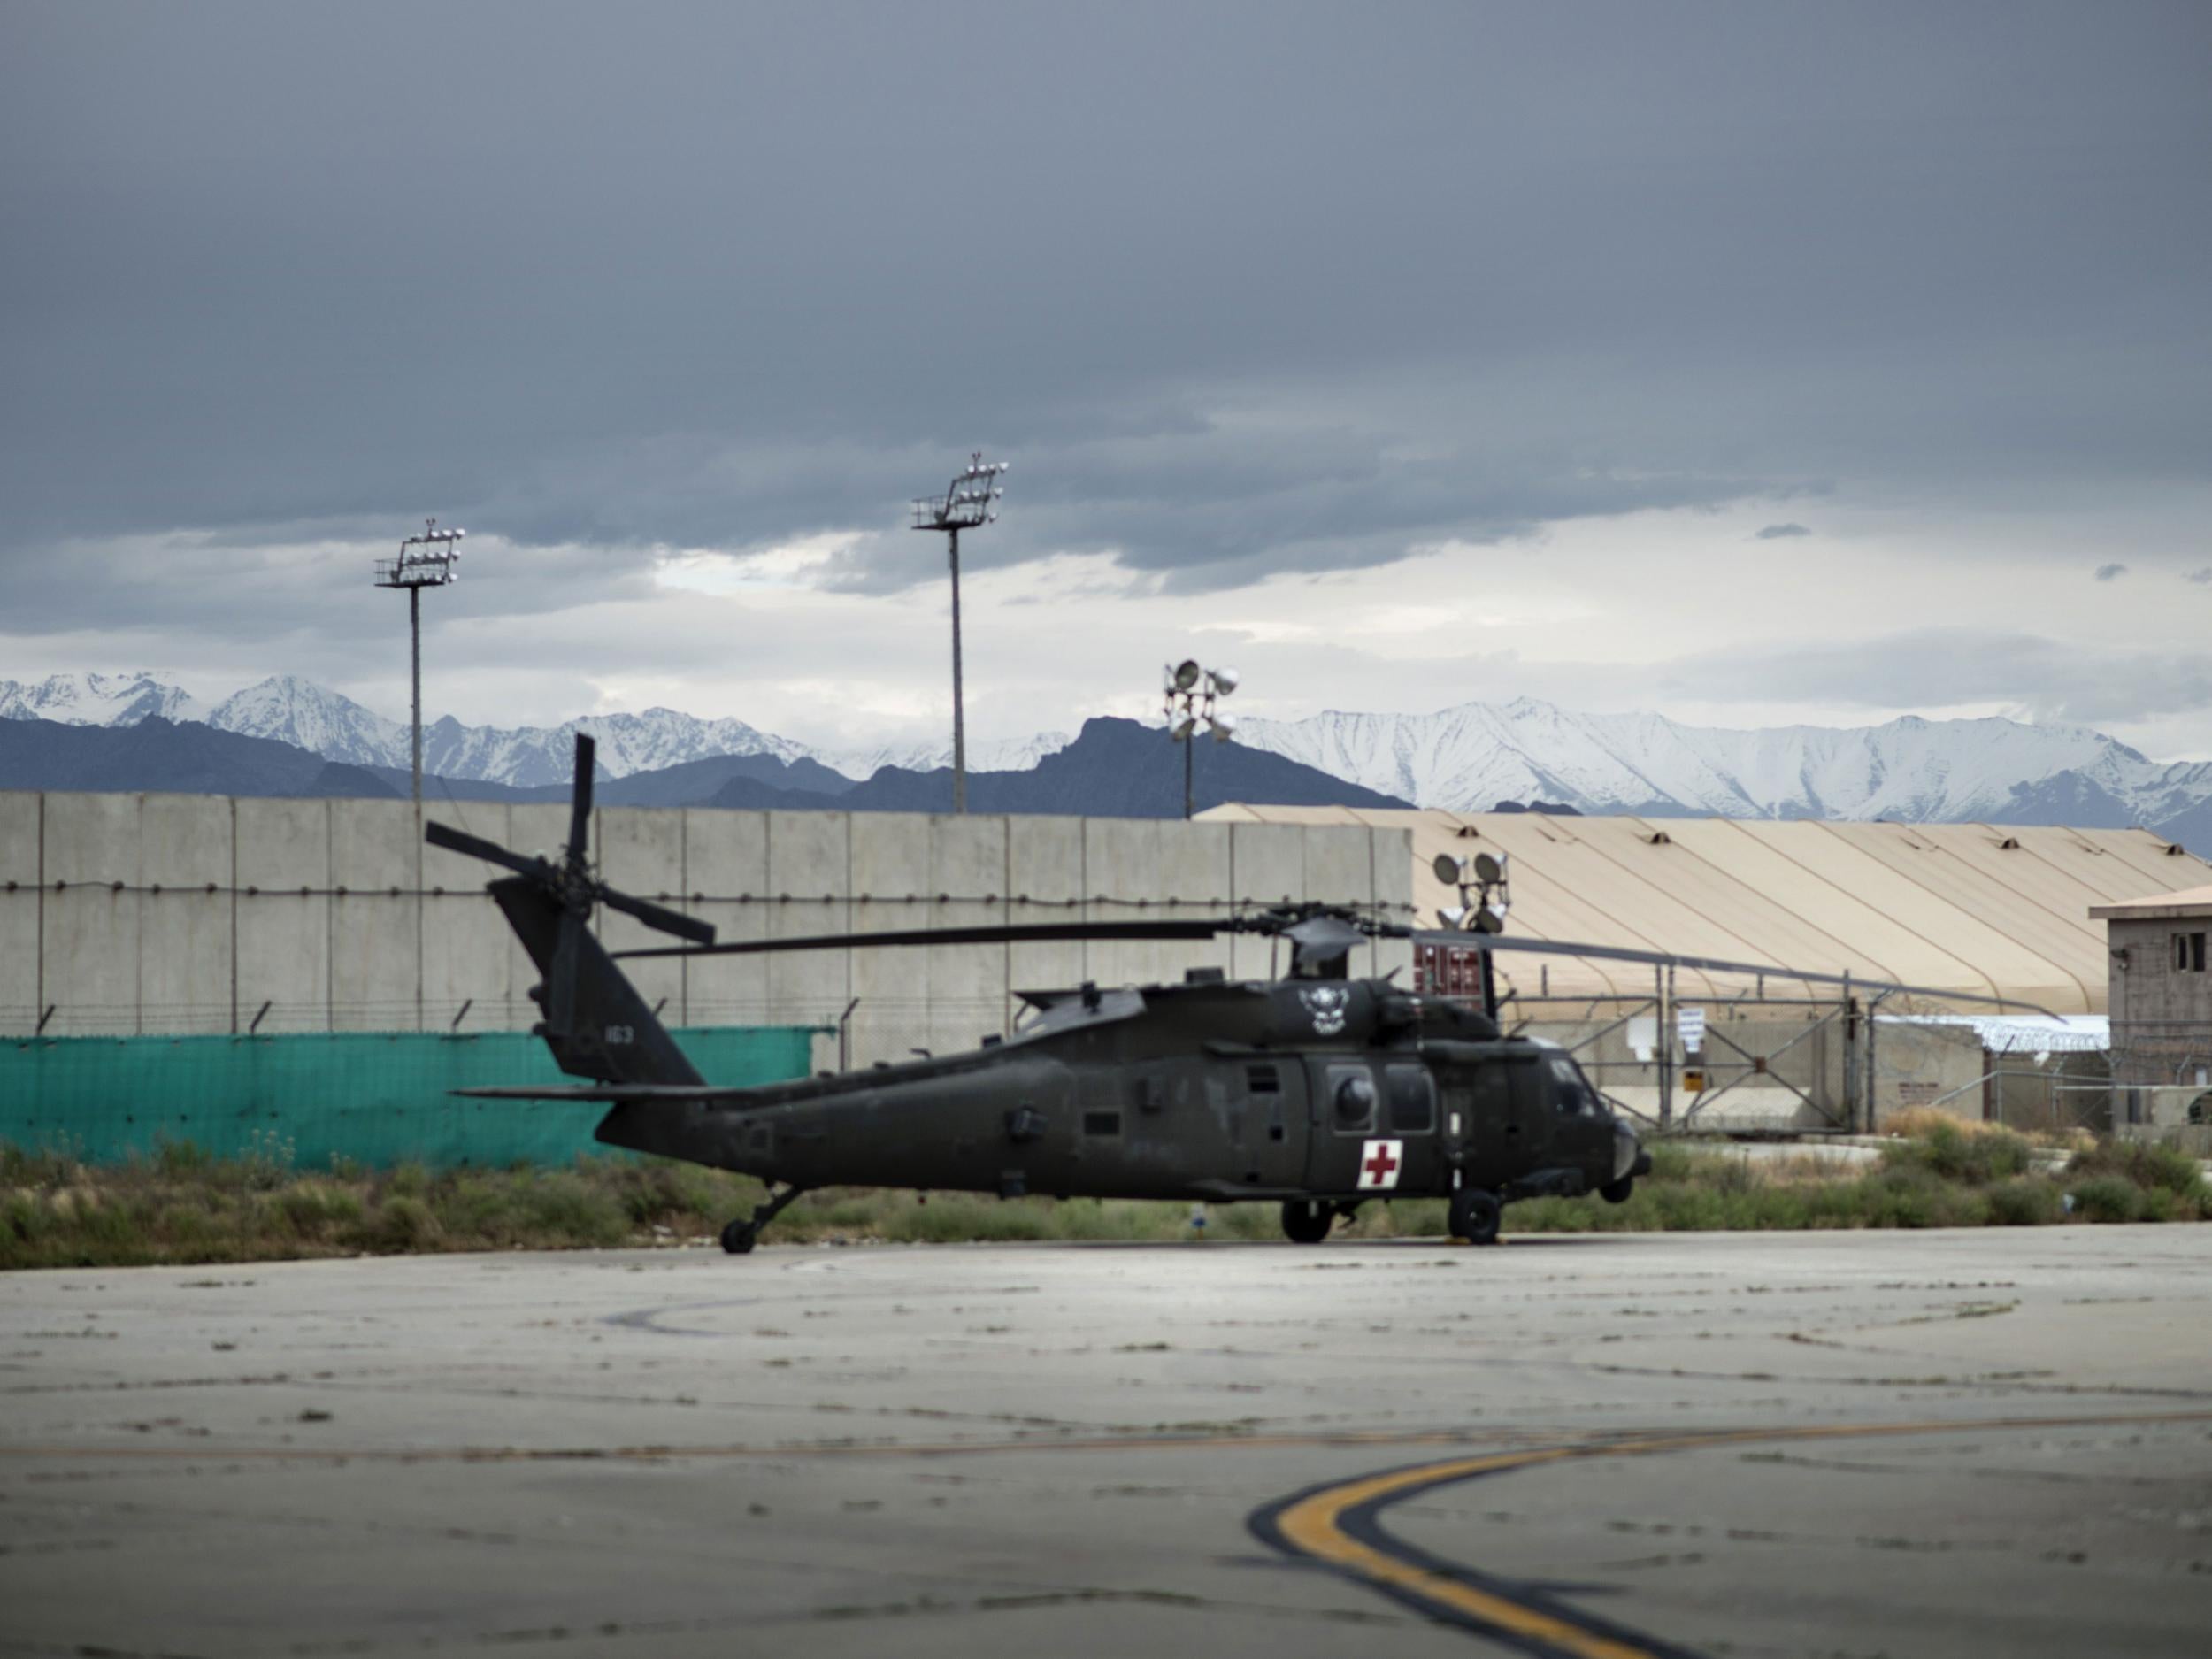 Bagram Airfield in the northeast of Afghanistan is frequently targeted by Taliban missile attacks